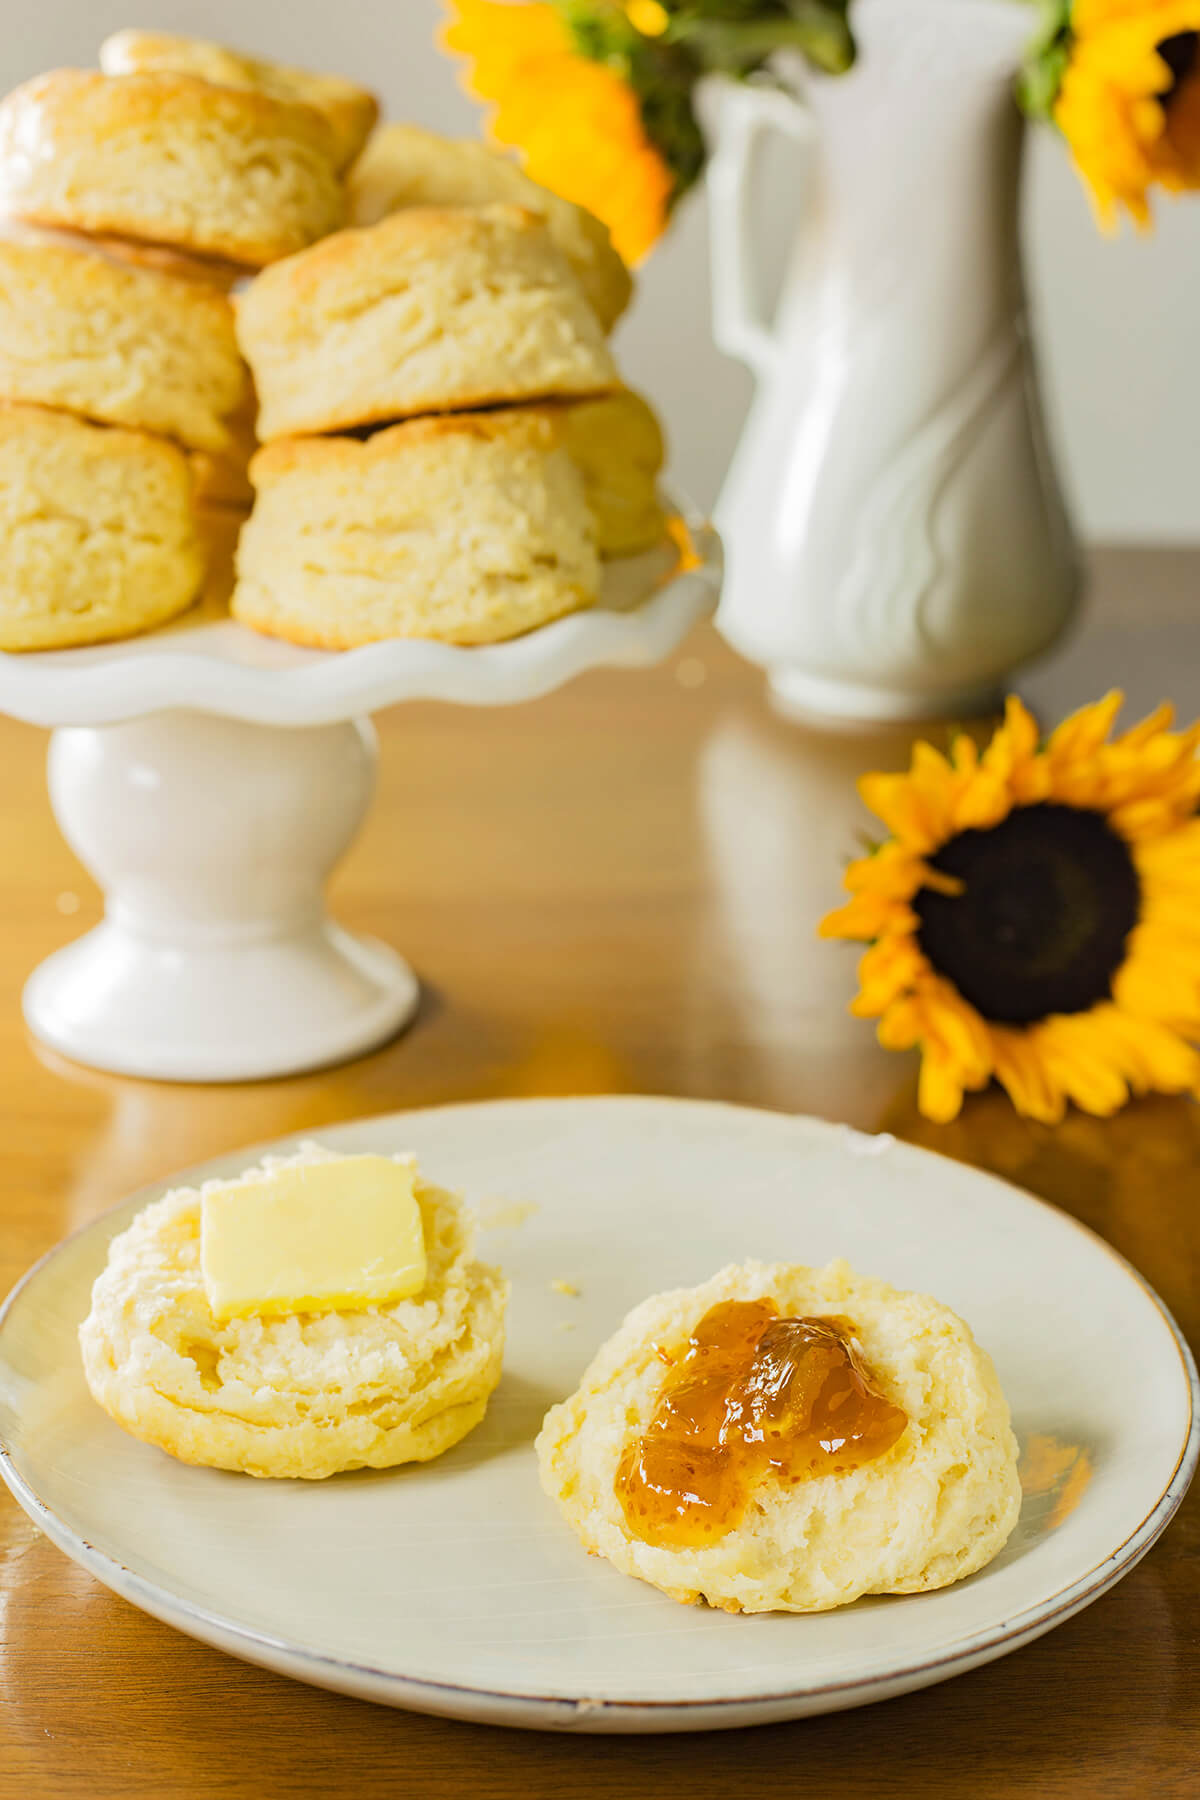 These buttermilk biscuits are flaky on the outside and light and fluffy on the inside- which equals perfection in my book. My grandma's flaky buttermilk biscuits makes the perfect side to any meal.